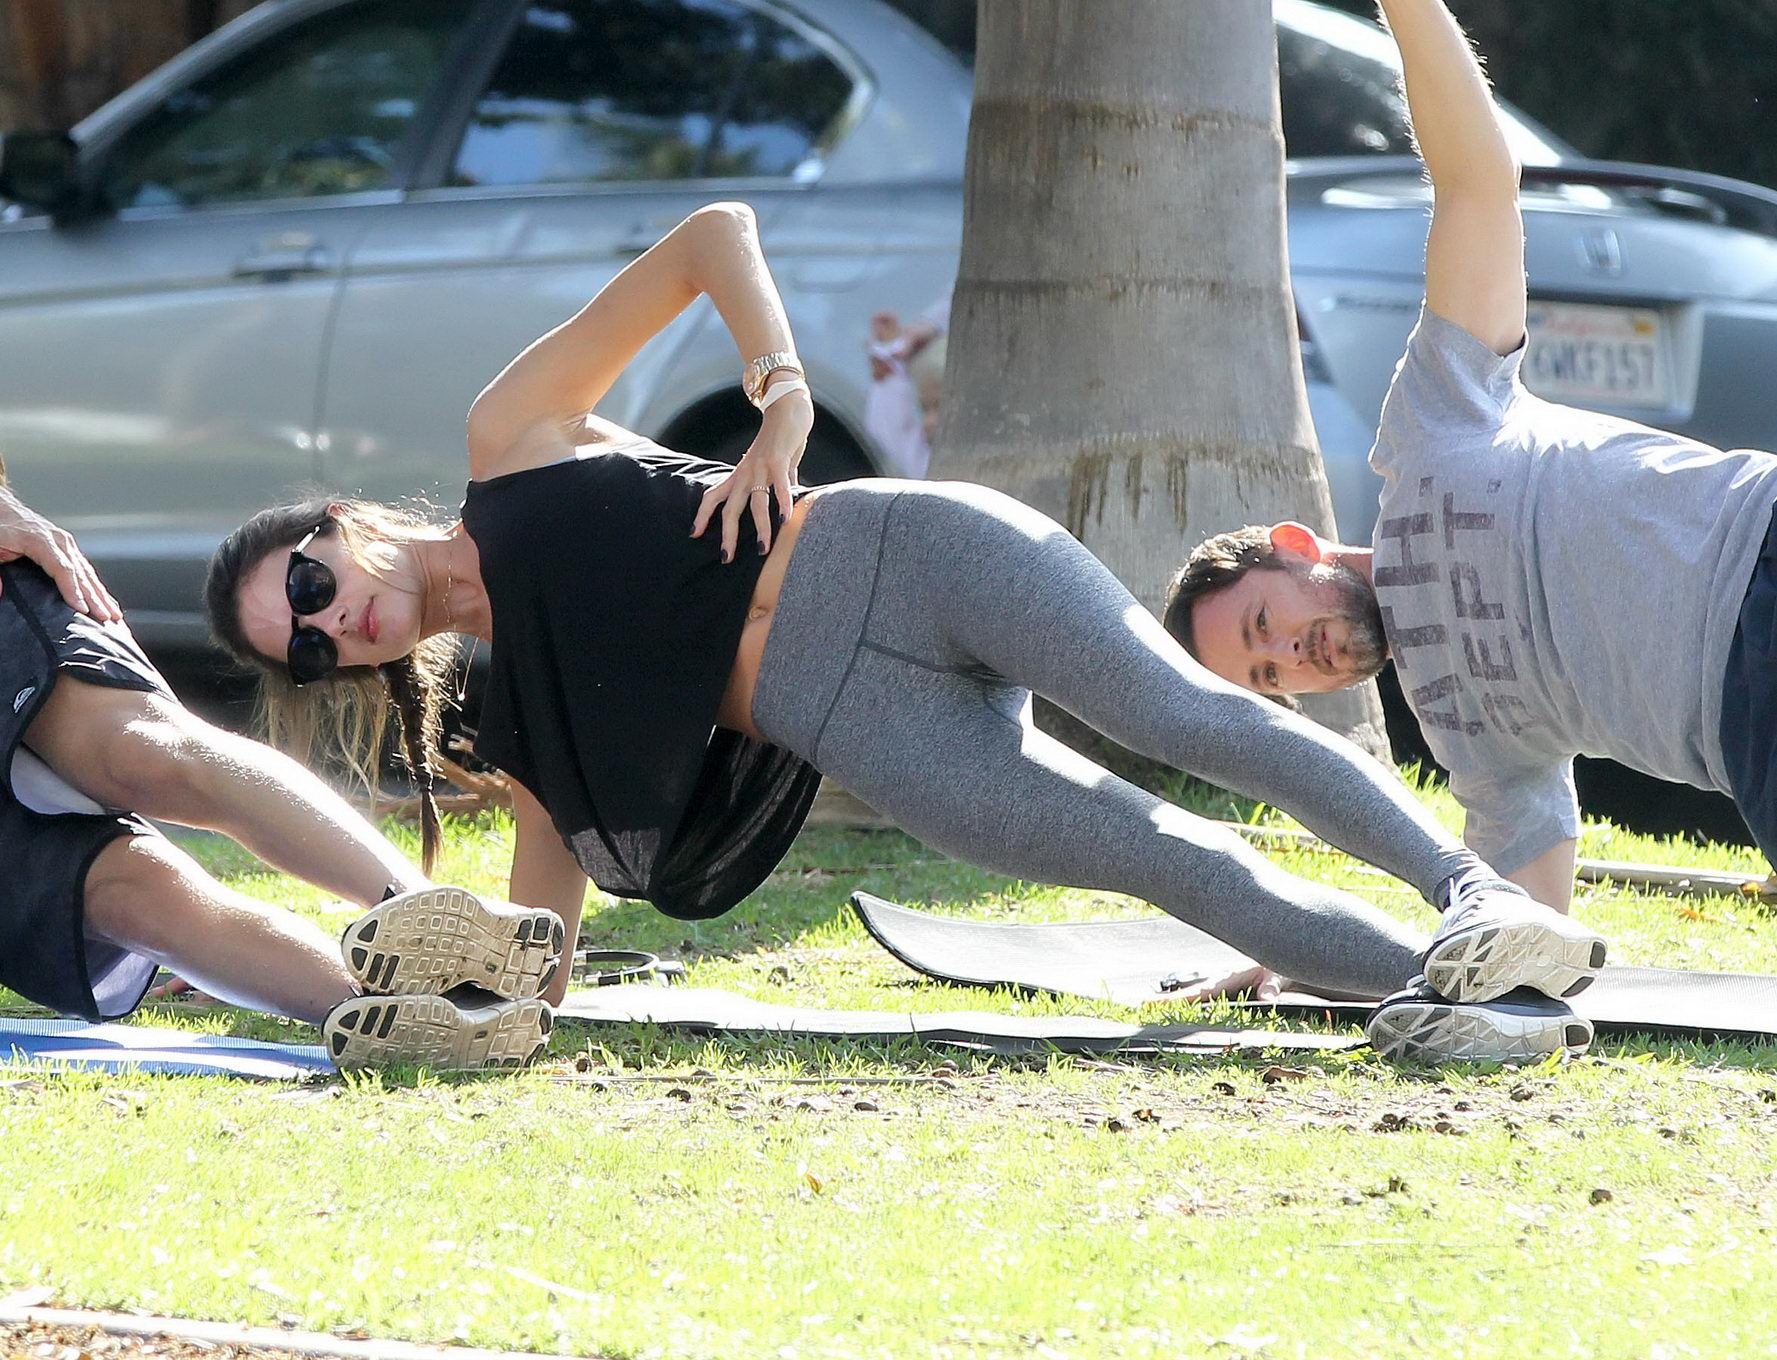 Alessandra Ambrosio shows off her ass in tights while working out at a park in S #75178979